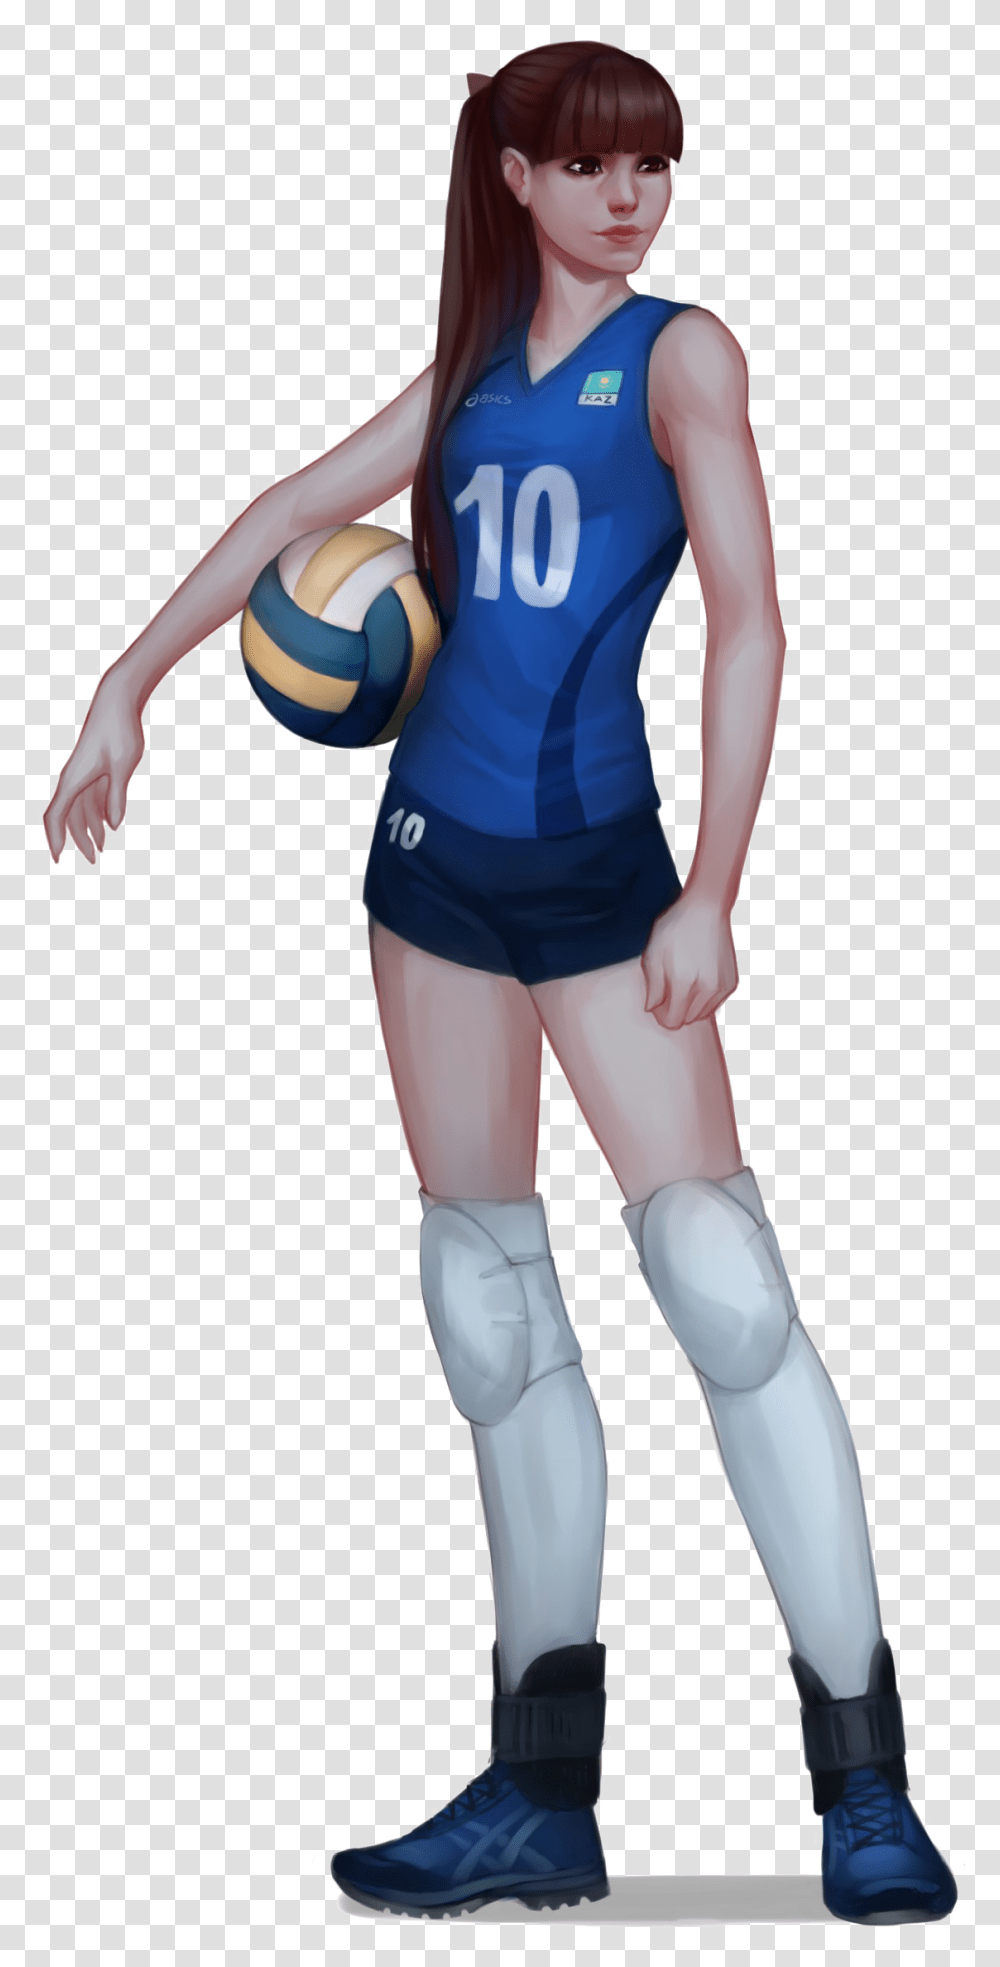 Volleyball Player Download Image Girl Volleyball Player Anime, Person, People, Costume Transparent Png